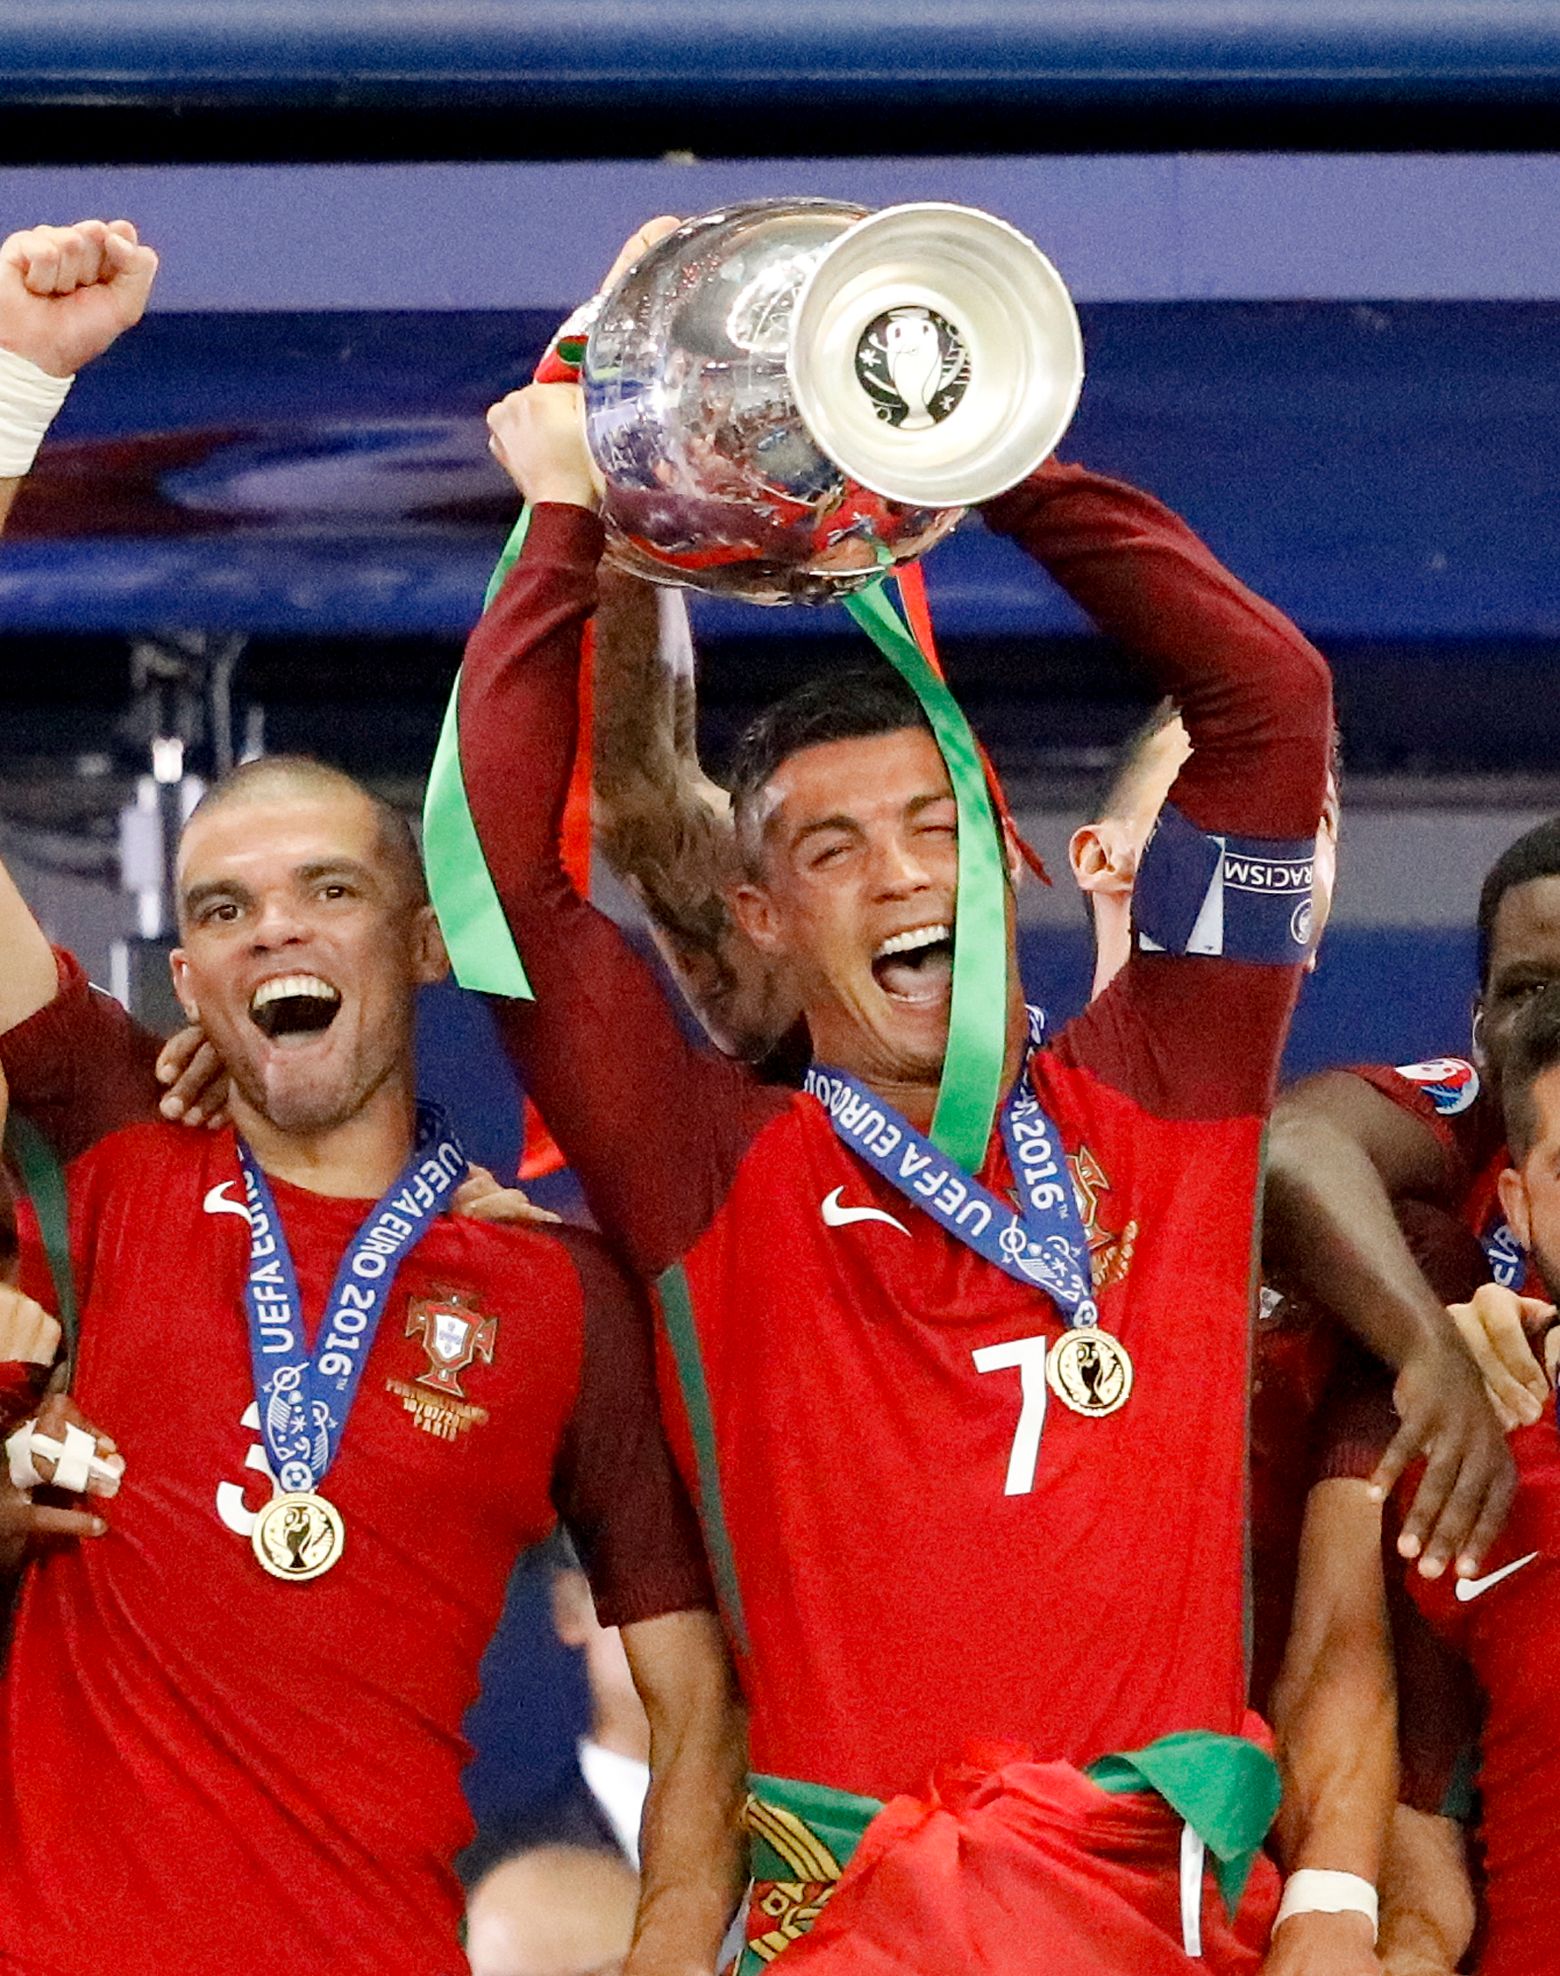 The moment I lifted the UEFA EURO Trophy in Portugal jersey, I